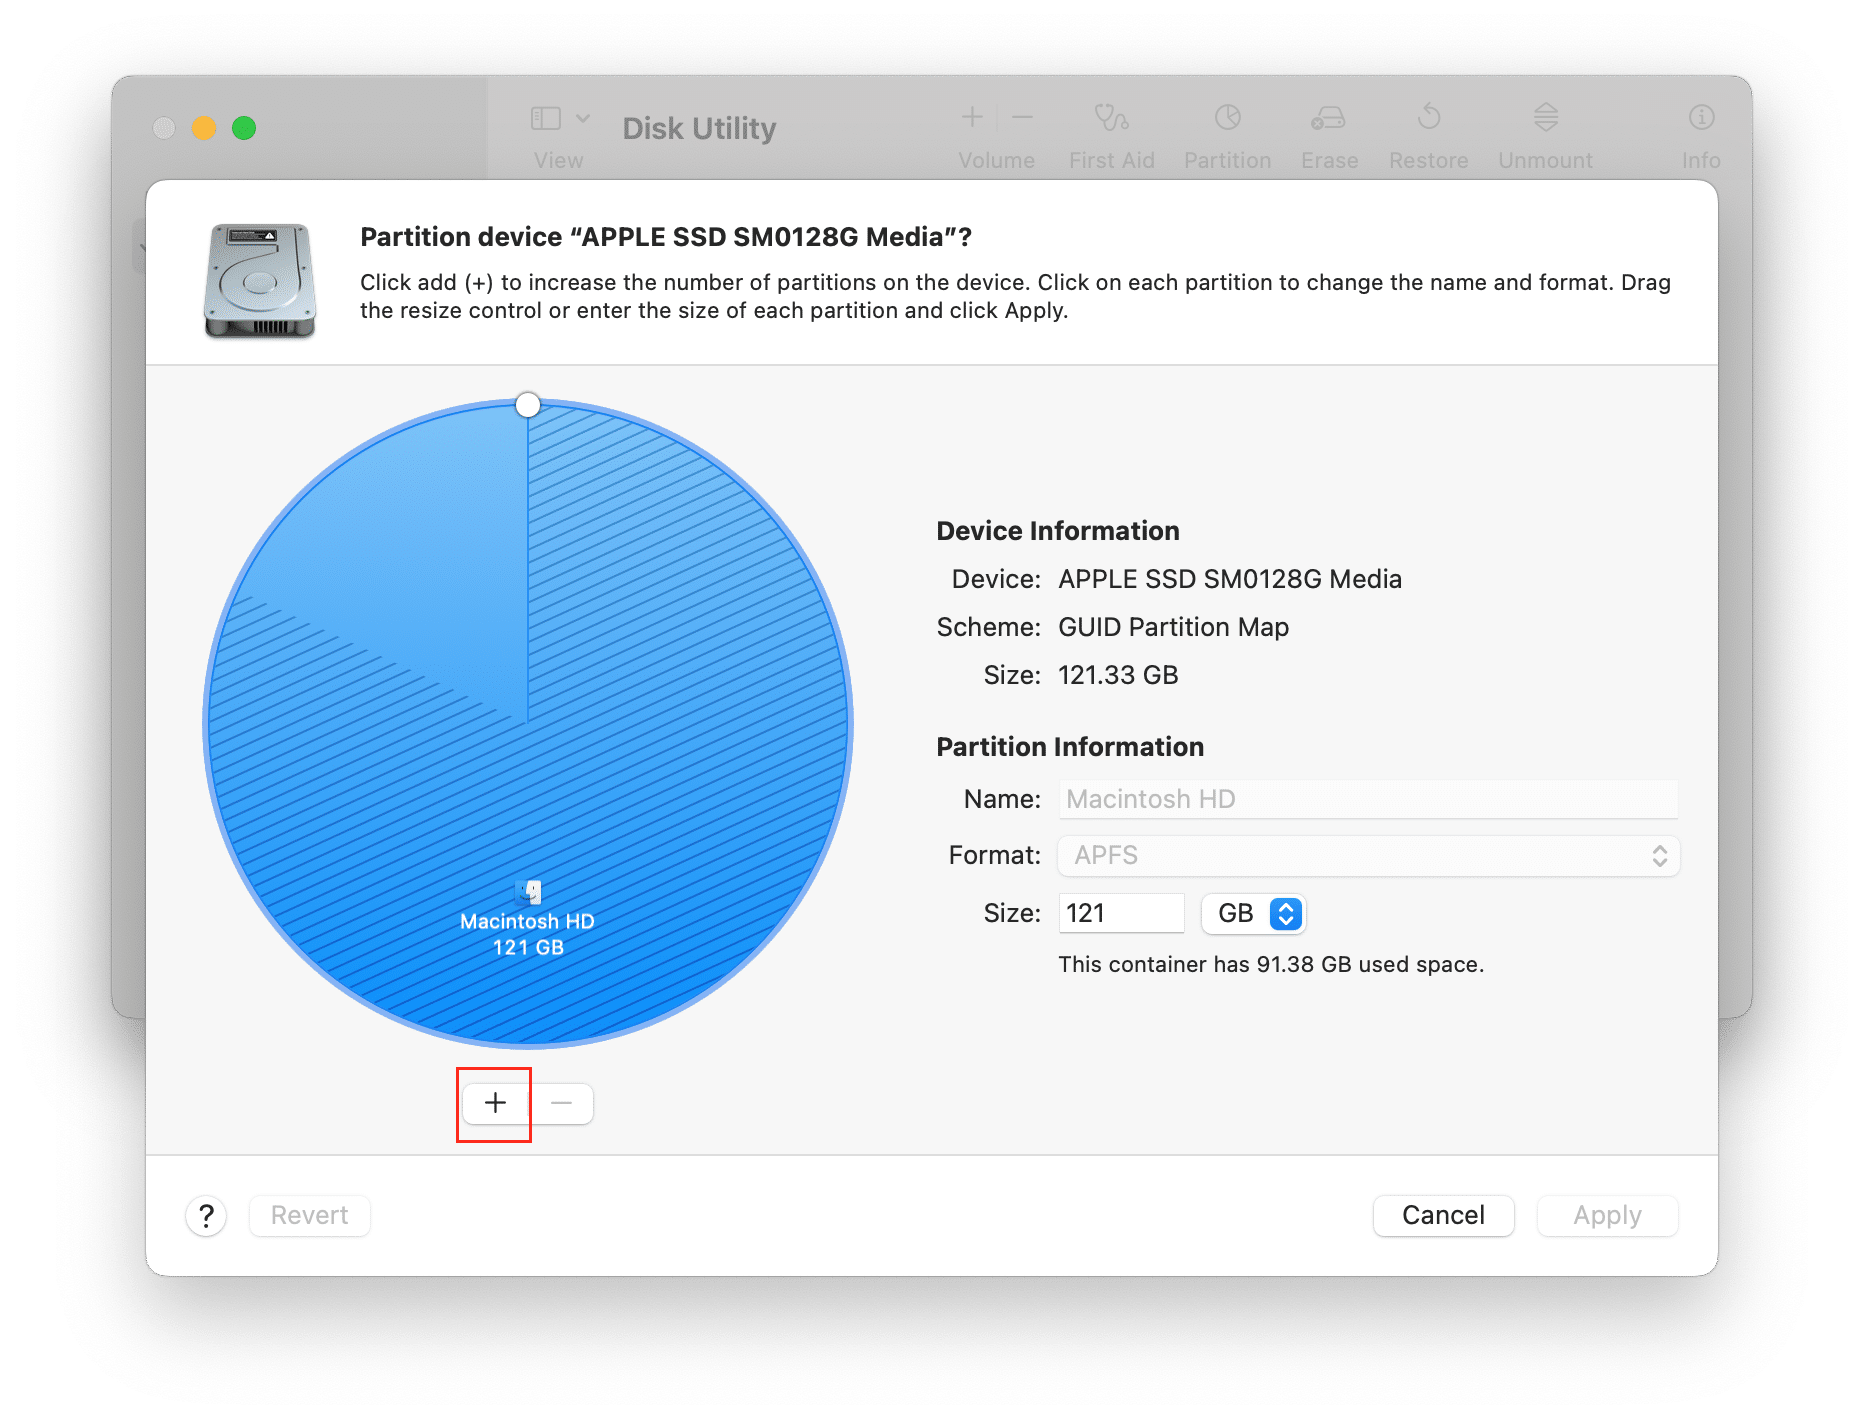 Disk Utility showing the Partition option